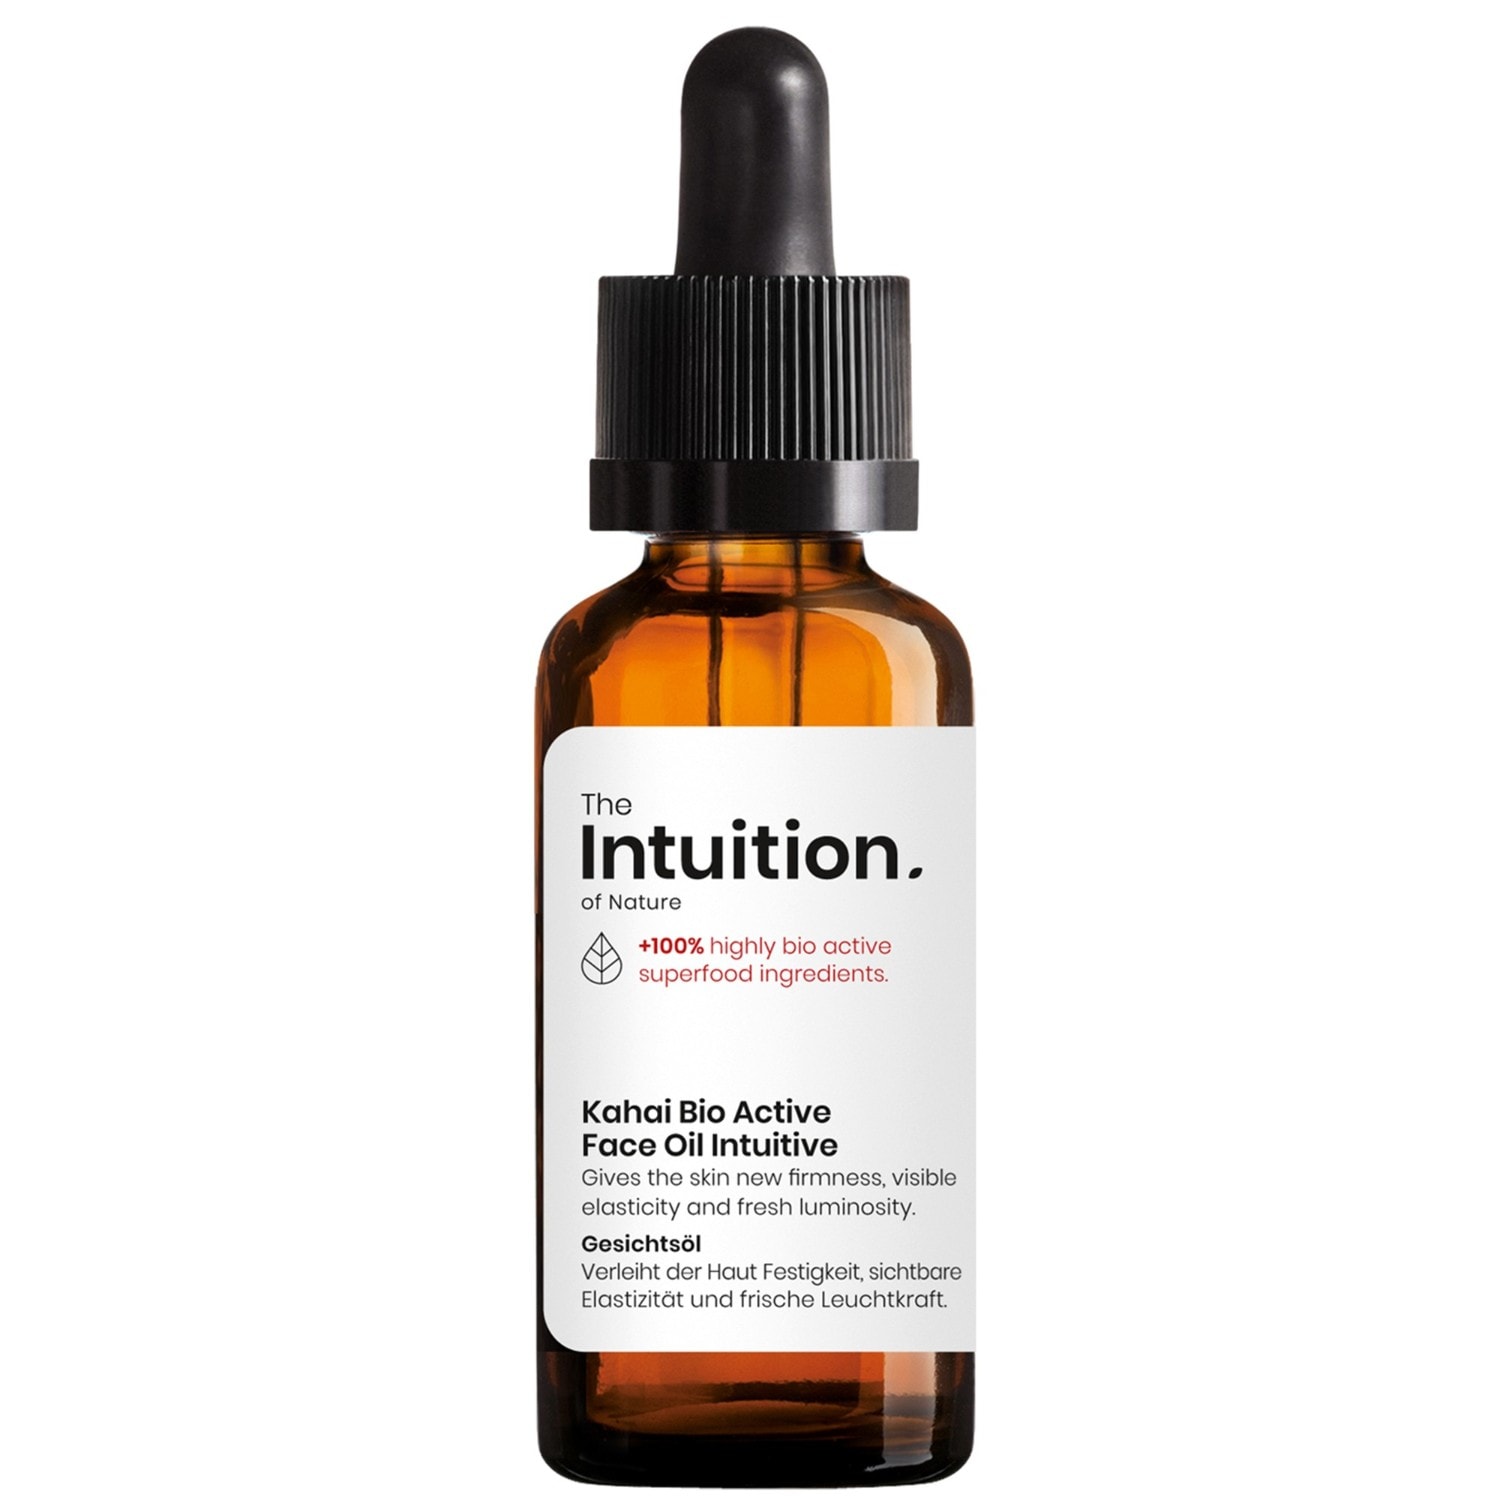 The Intuition Of Nature Kahai Bio Active Face Oil Intuitive